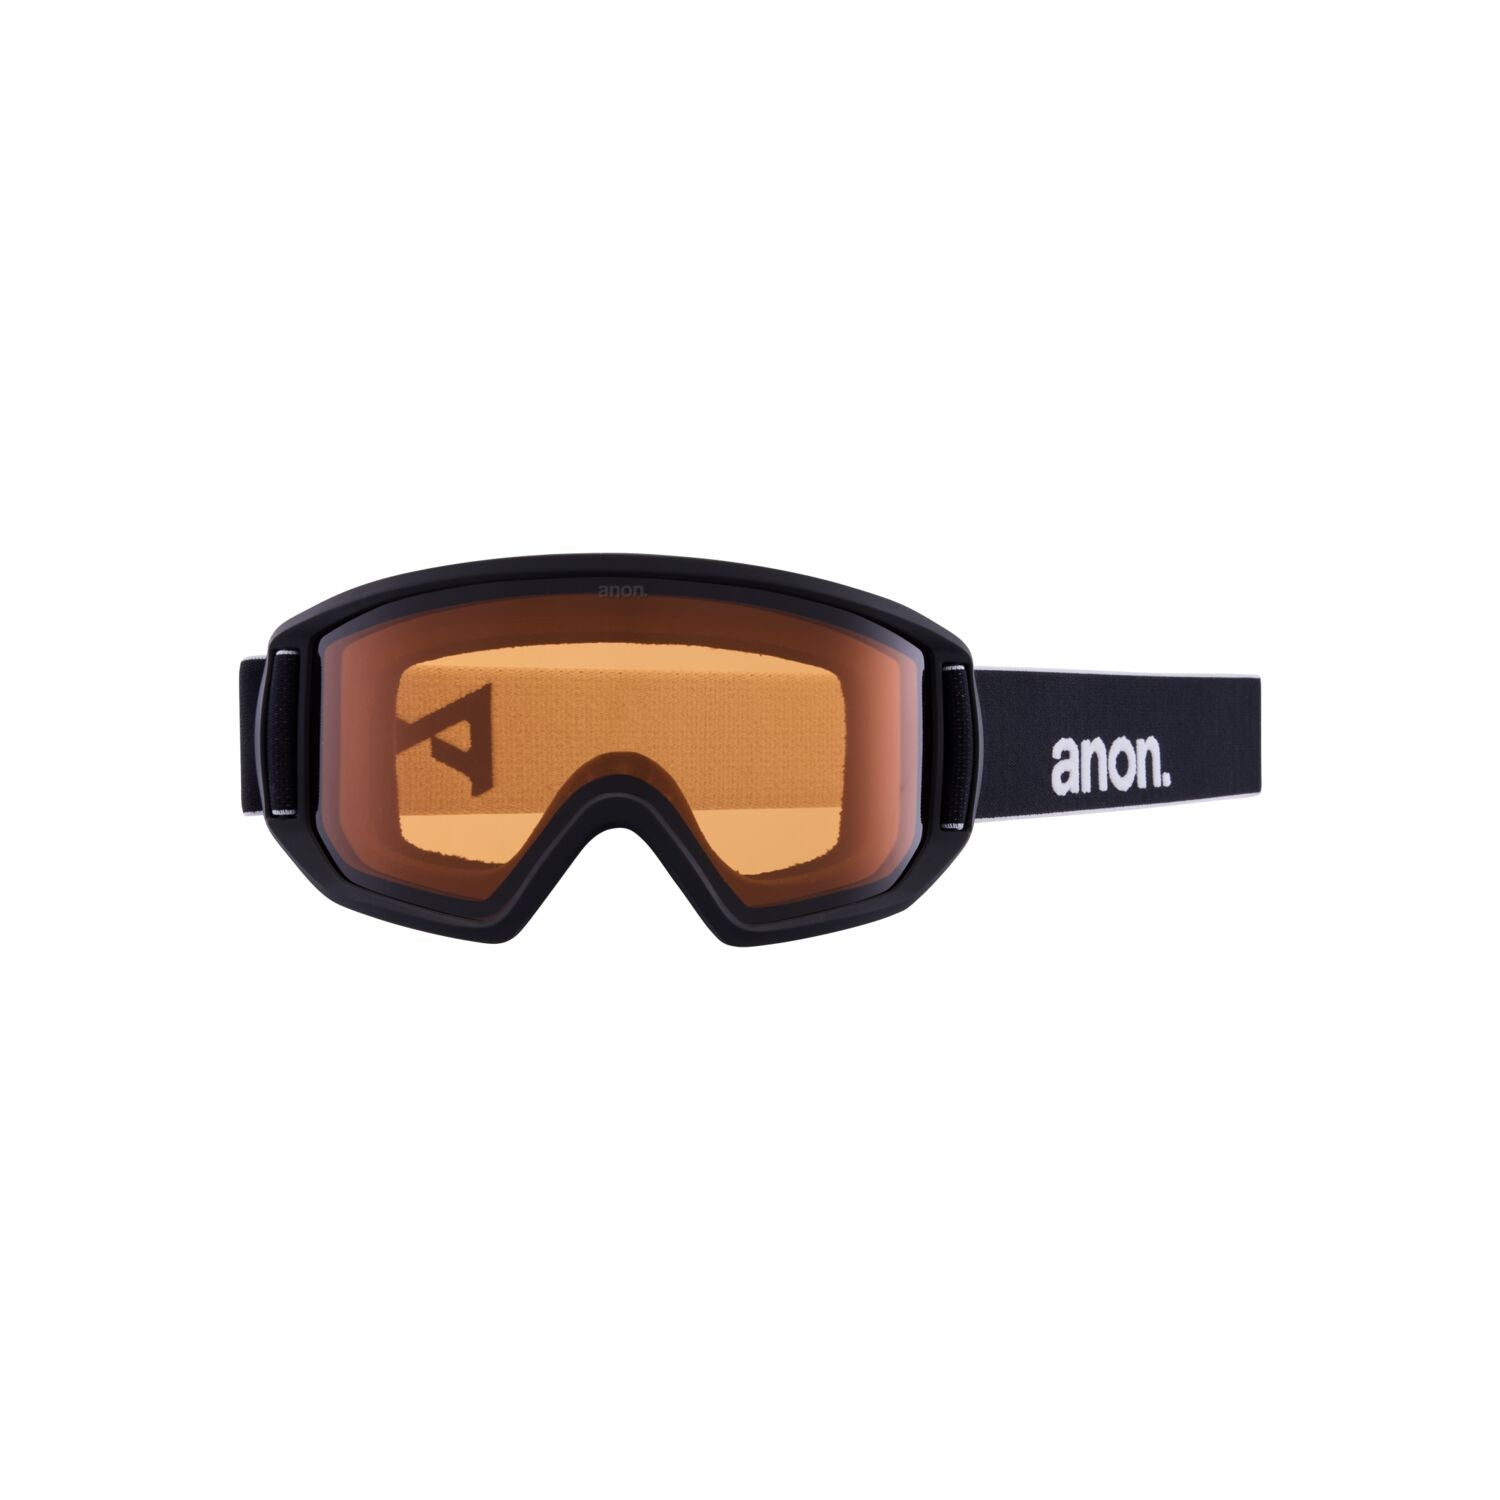 Anon Relapse Goggle 2023 Black - Perceive Sunny Red w/ Amber Lens